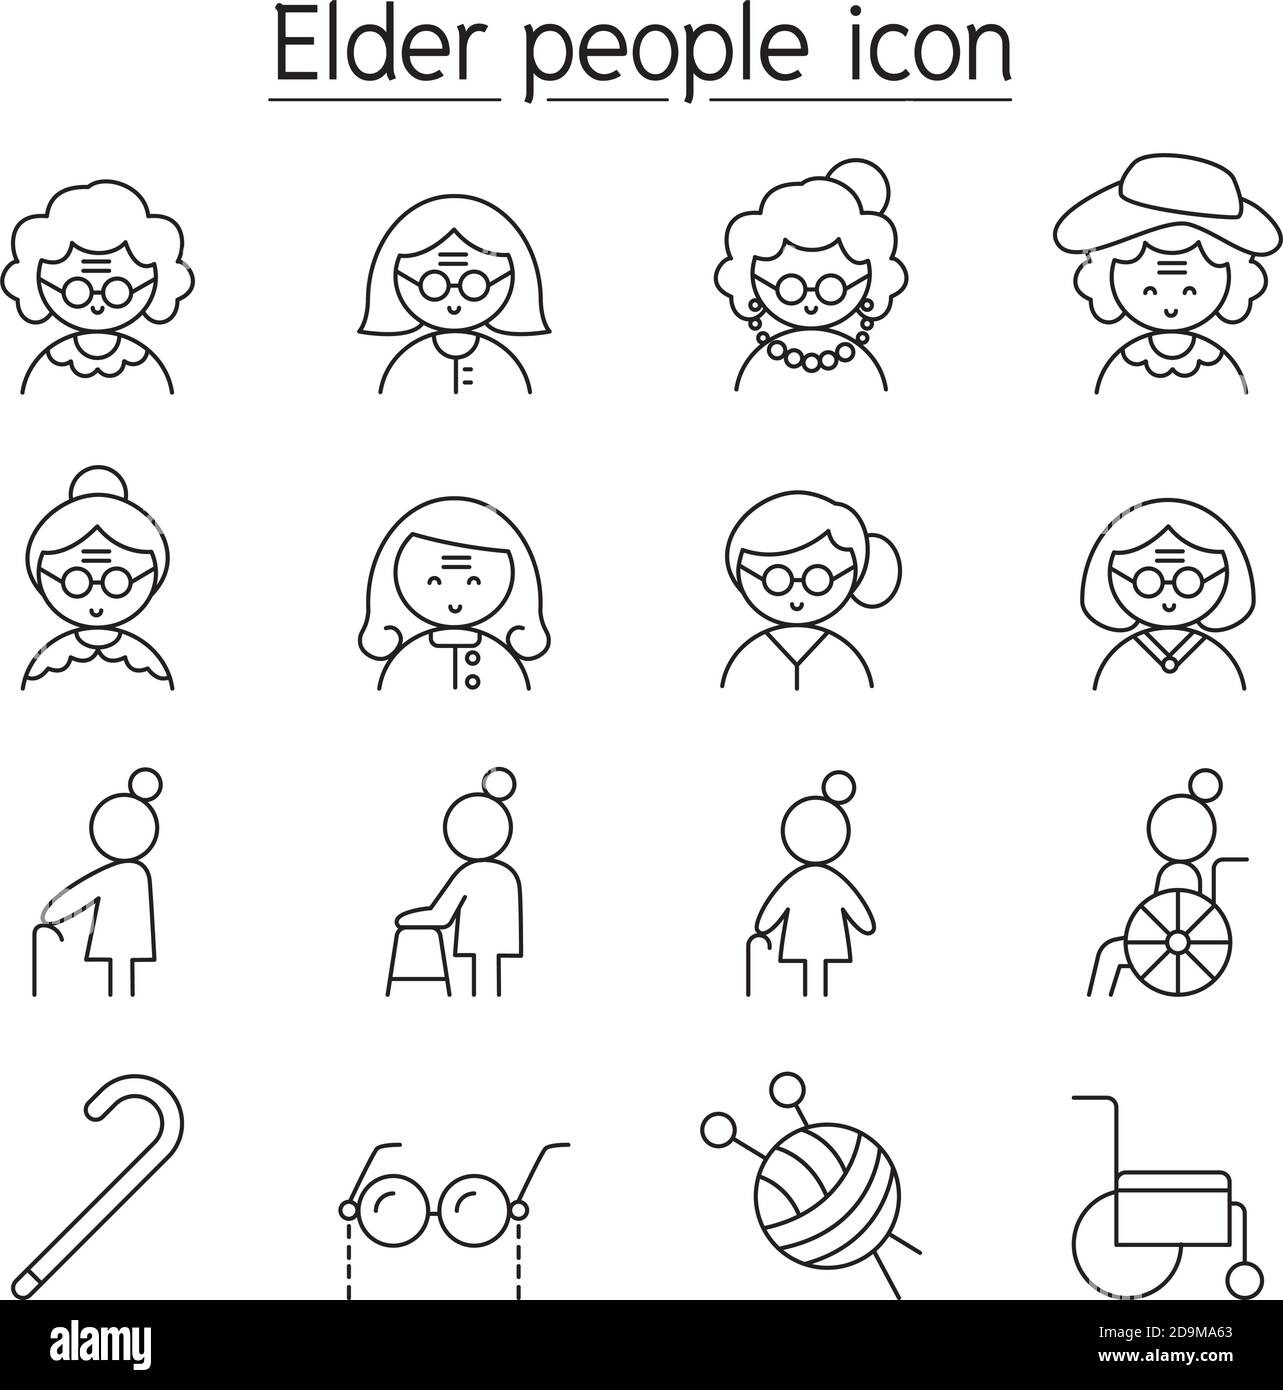 Elder woman, Grandmother icon set in thin line style Stock Vector